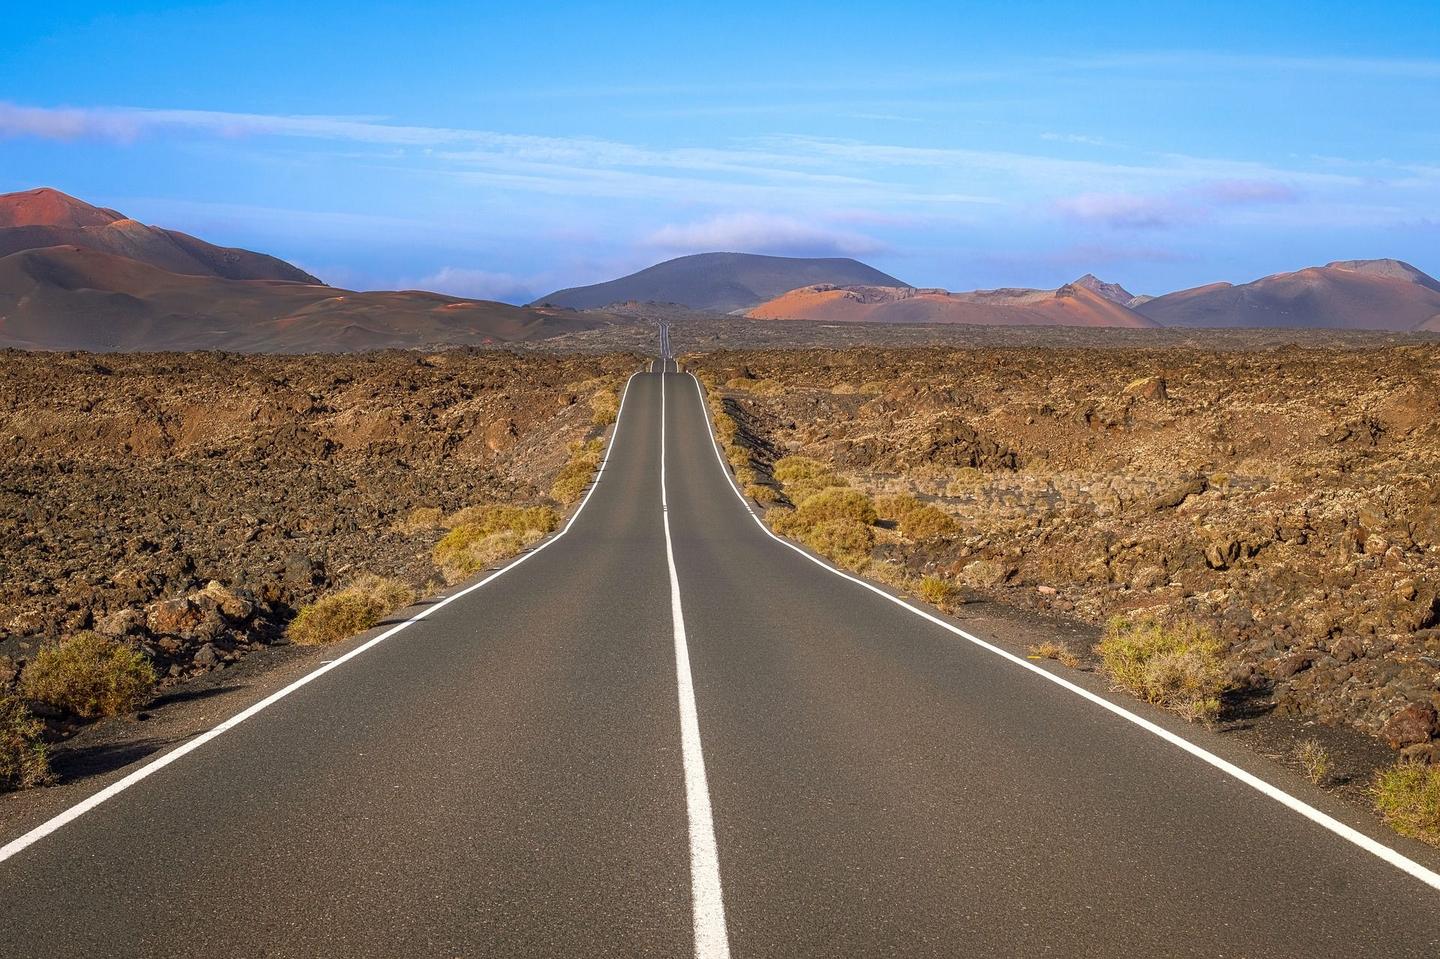 A long, straight road cutting through the volcanic landscape of Lanzarote, with rocky terrain and distant mountains under a clear blue sky.